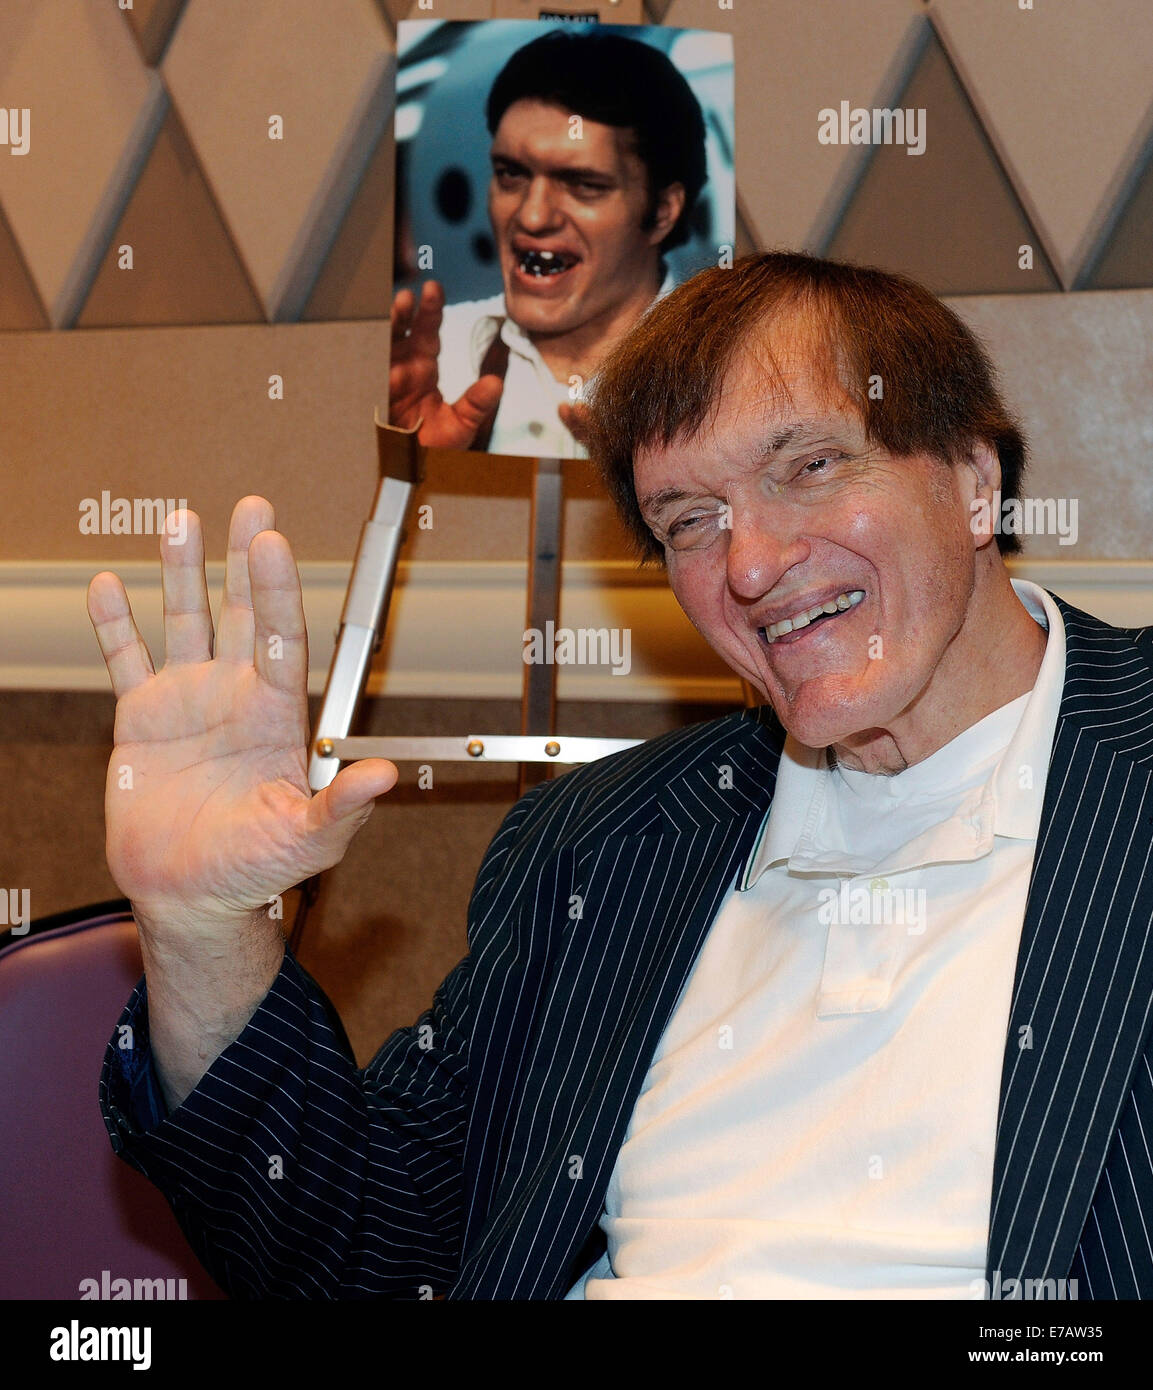 FILEPIX: 10th Sep, 2014. RICHARD KIEL, the 7-foot-2 actor best known for portraying the James Bond villain Jaws has died at age 74. Kiel died Wednesday at St. Agnes Medical Center. A cause of the death was not released. Kiel, who has credits in more than 65 TV shows and 20 movies, was best known for playing the hulking, metal-mouthed Bond villain in 'The Spy Who Loved Me' and 'Moonraker.' Pictured: Aug. 12, 2012 - Las Vegas, Nevada U.S. - Actor RICHARD KIEL participates in the Official Star Trek Convention at the Rio Hotel & Casino. Credit:  David Becker/ZUMA Wire/Alamy Live News Stock Photo